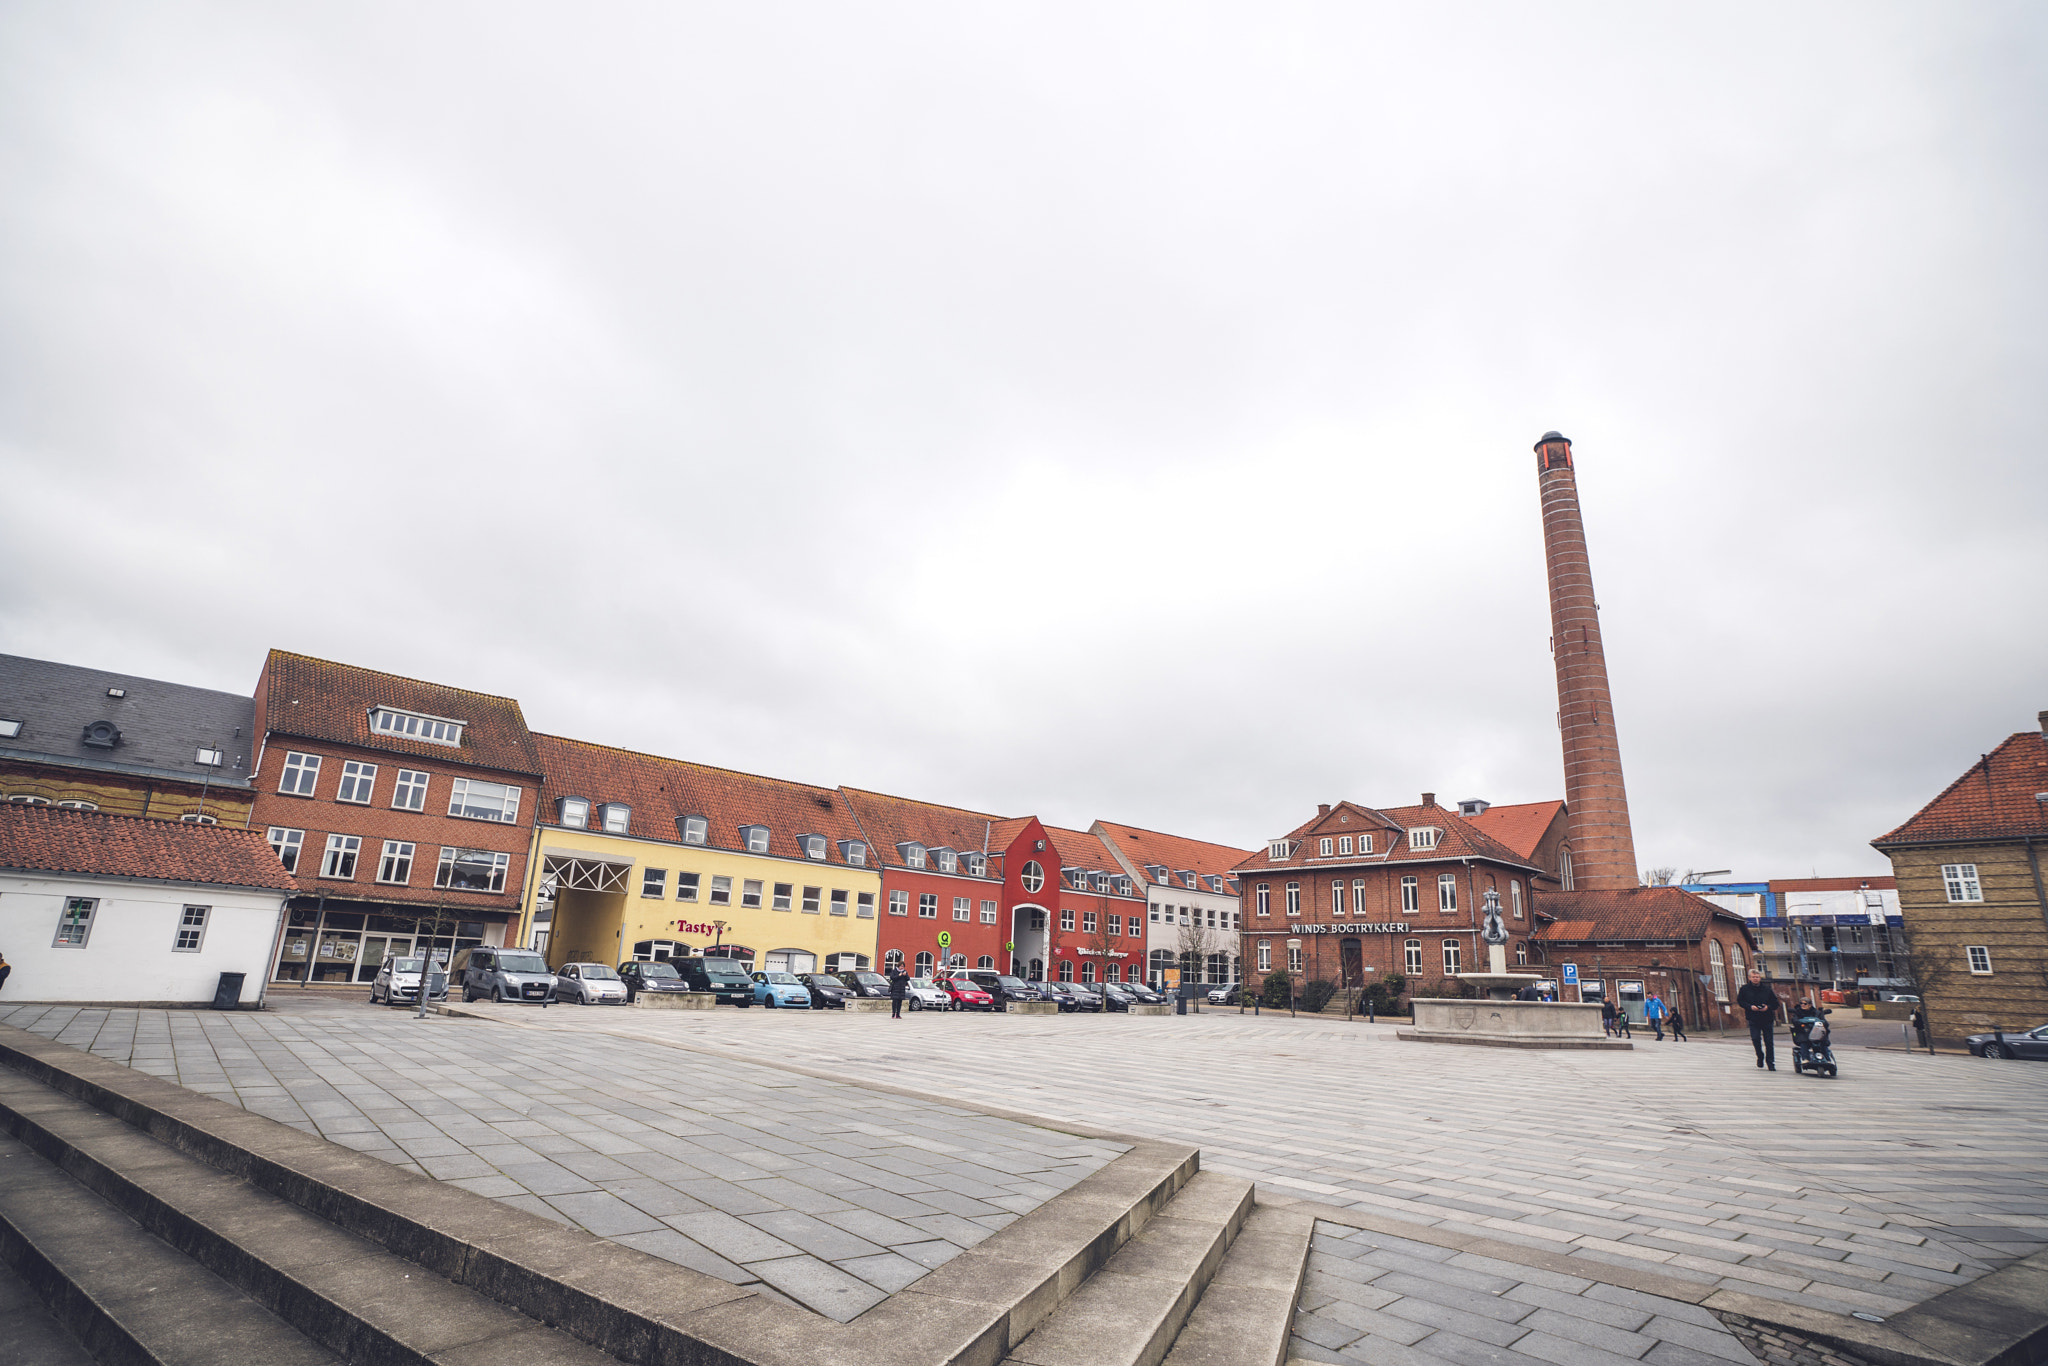 Sony a99 II sample photo. Downtown square in haderslev city in denmark photography